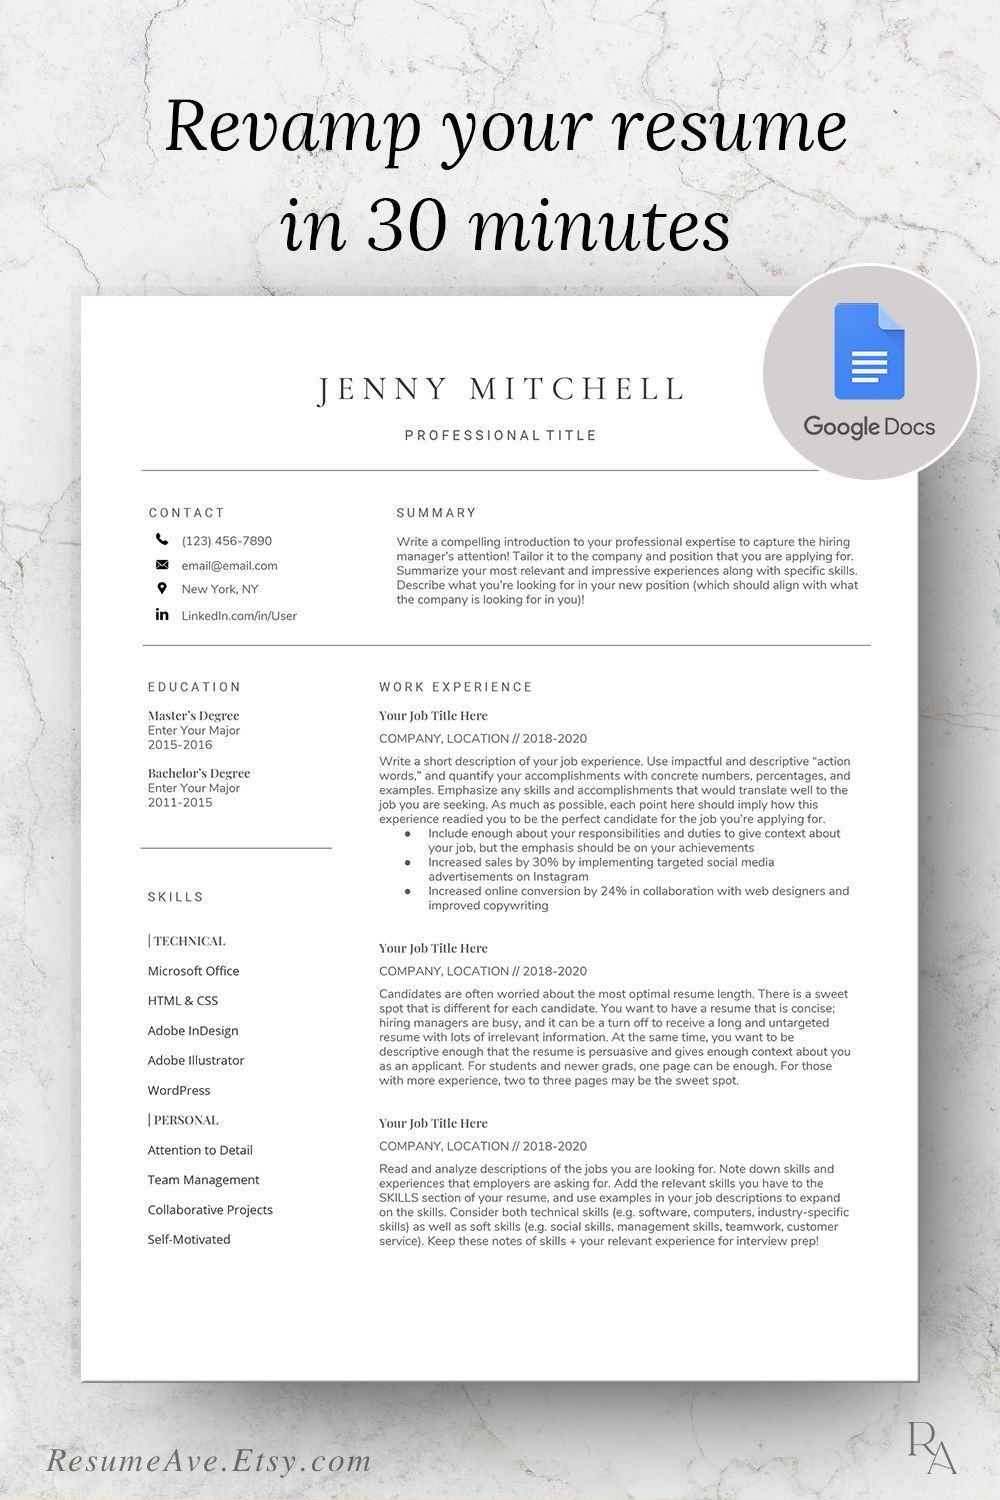 Google docs resume template with cover letter cv design for